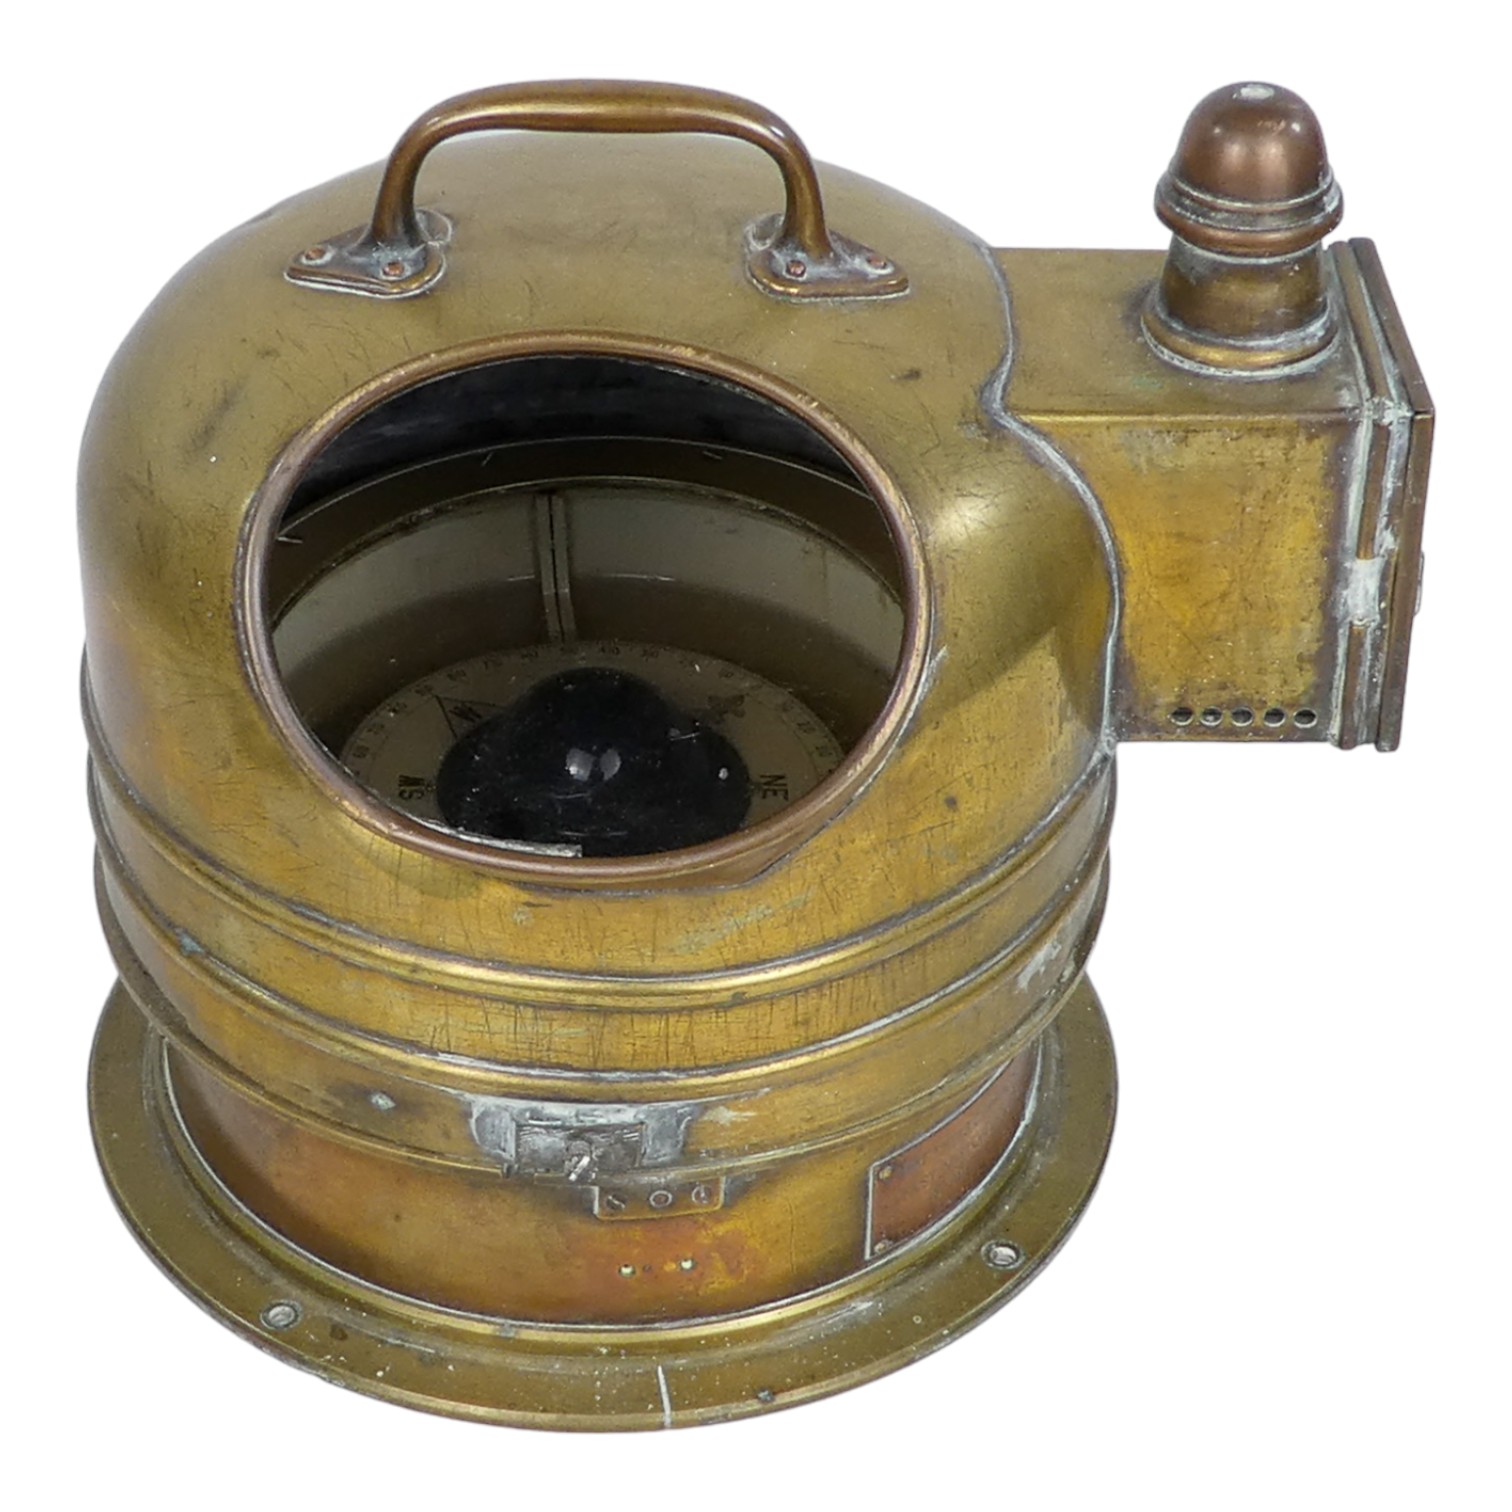 An early 20th century brass binnacle compass - patt. 1133 Fast Motor Boats, the dome with handle